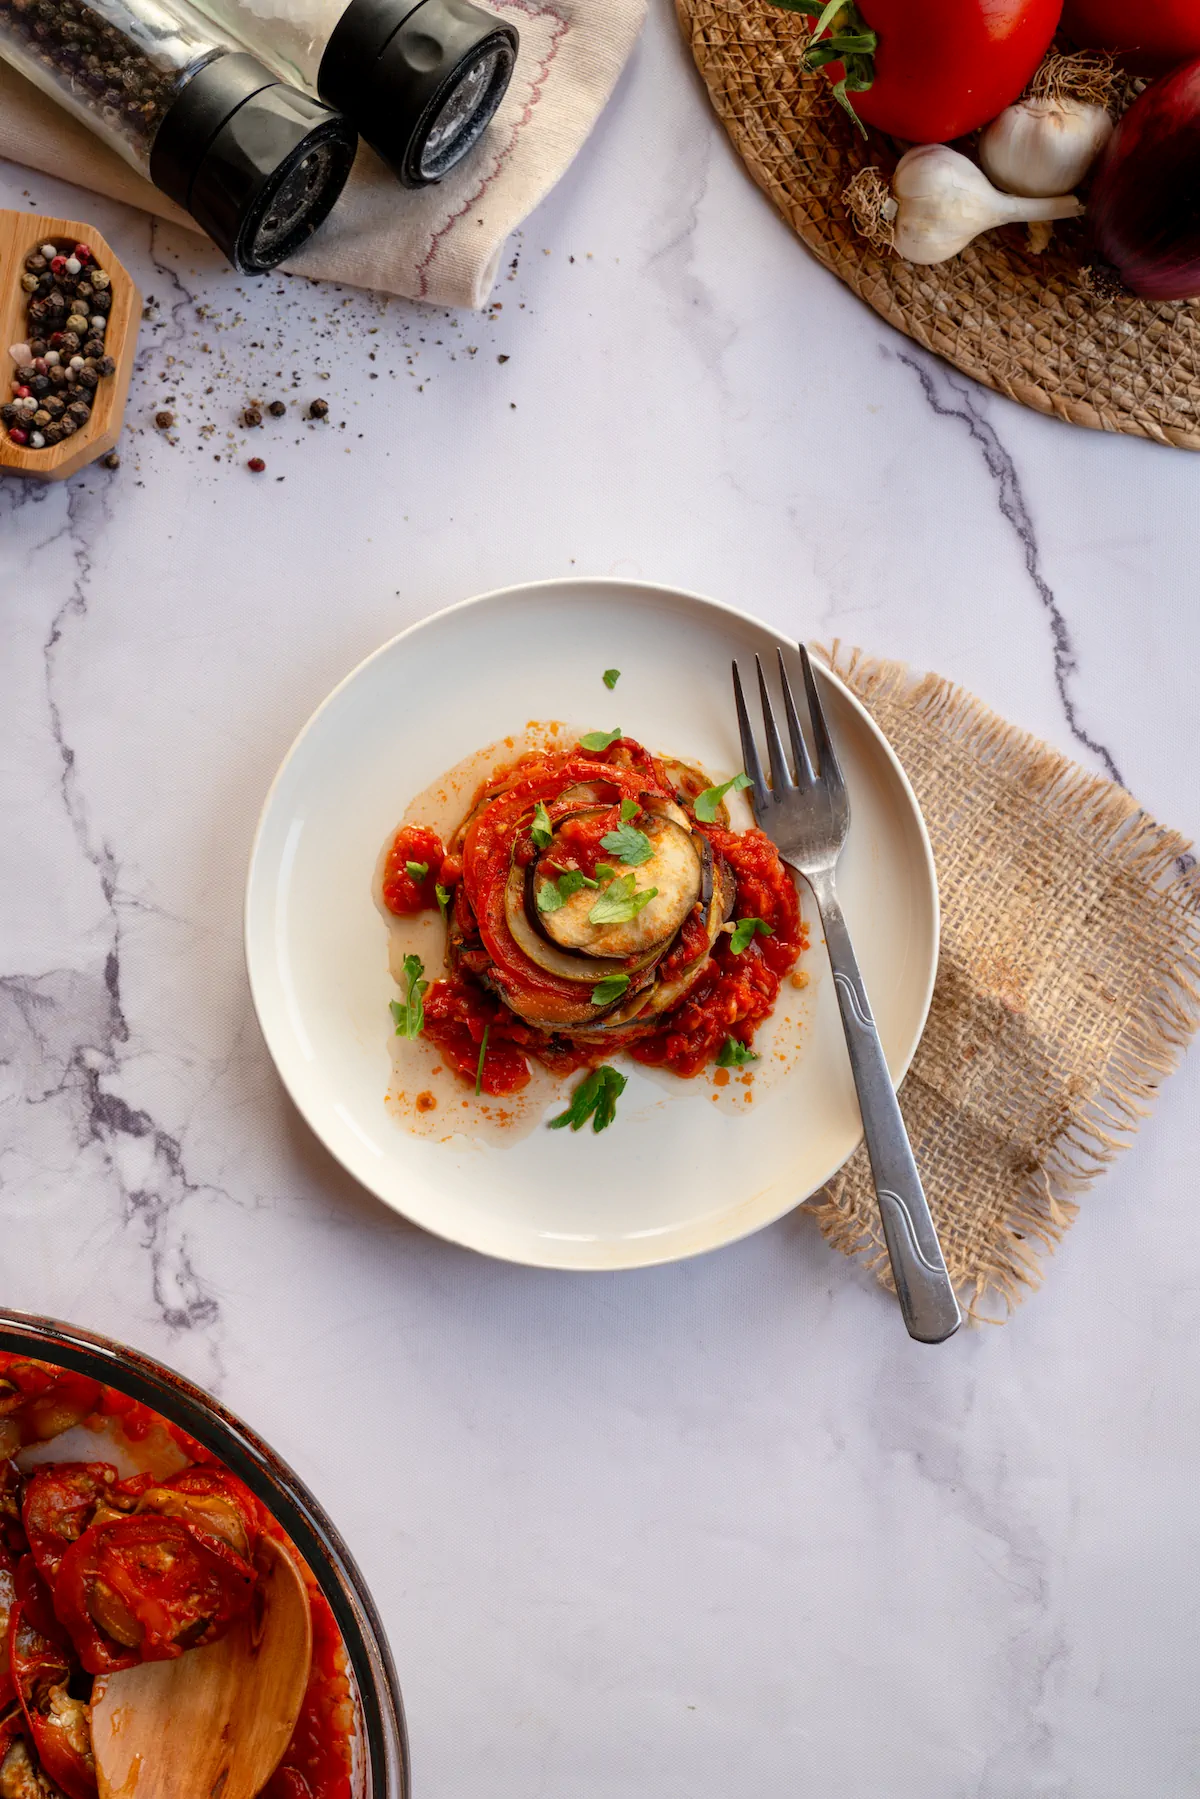 Keto ratatouille served on a plate and garnished with fresh herbs.